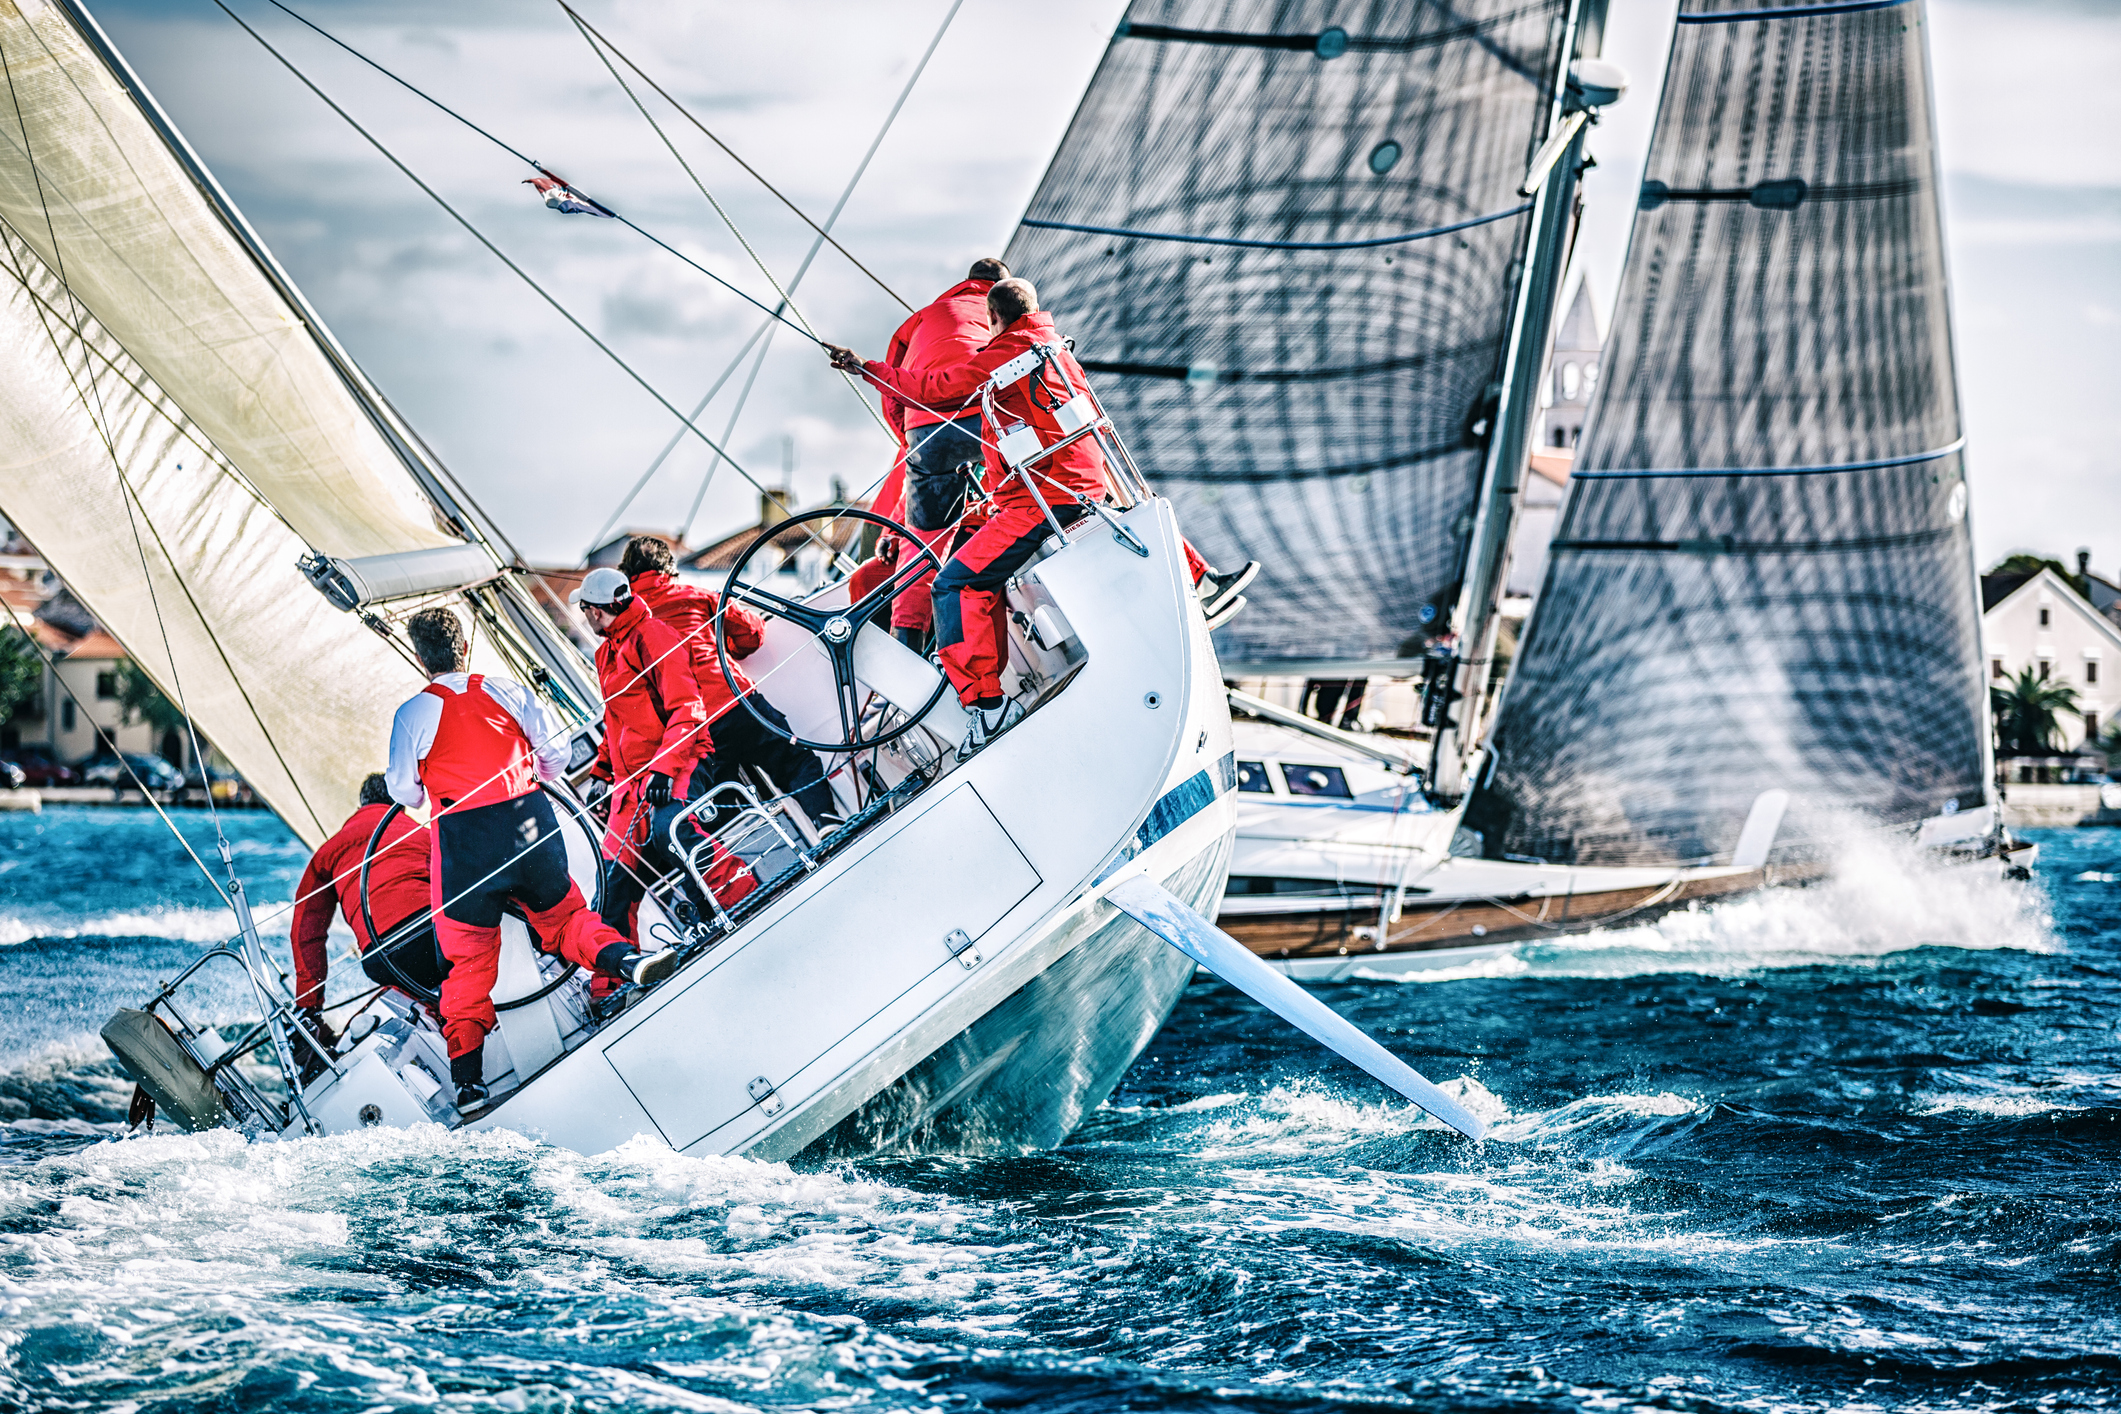 Navigating Rough Waters: 4 Ways To Lead Your Team Through Them